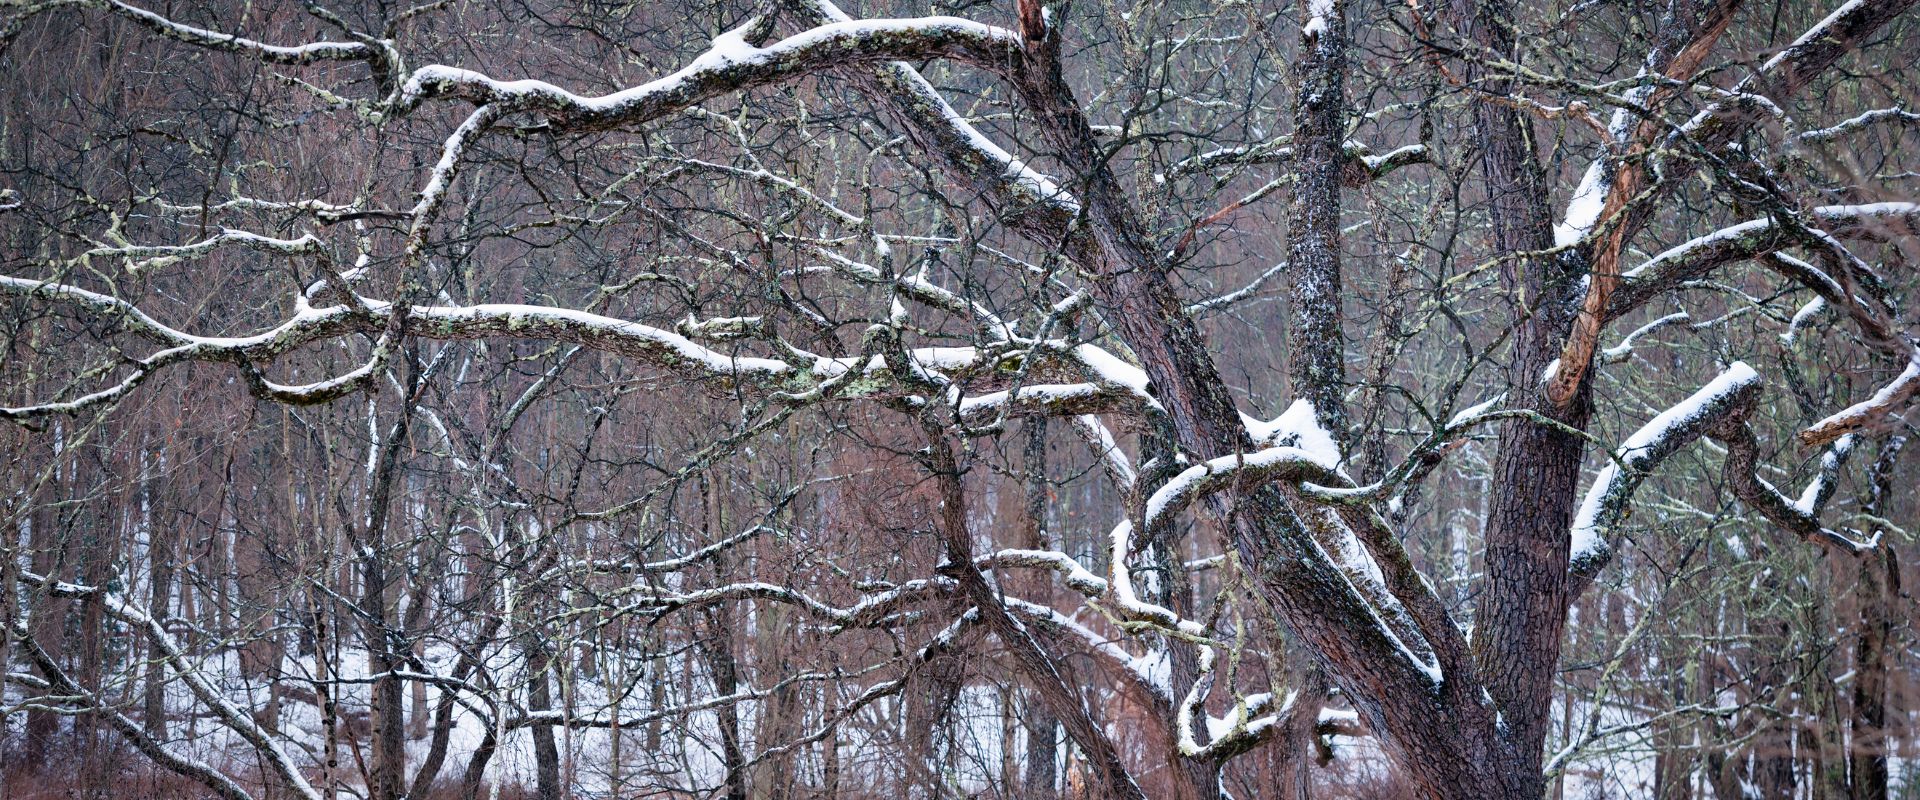 Tree braches covered in snow.